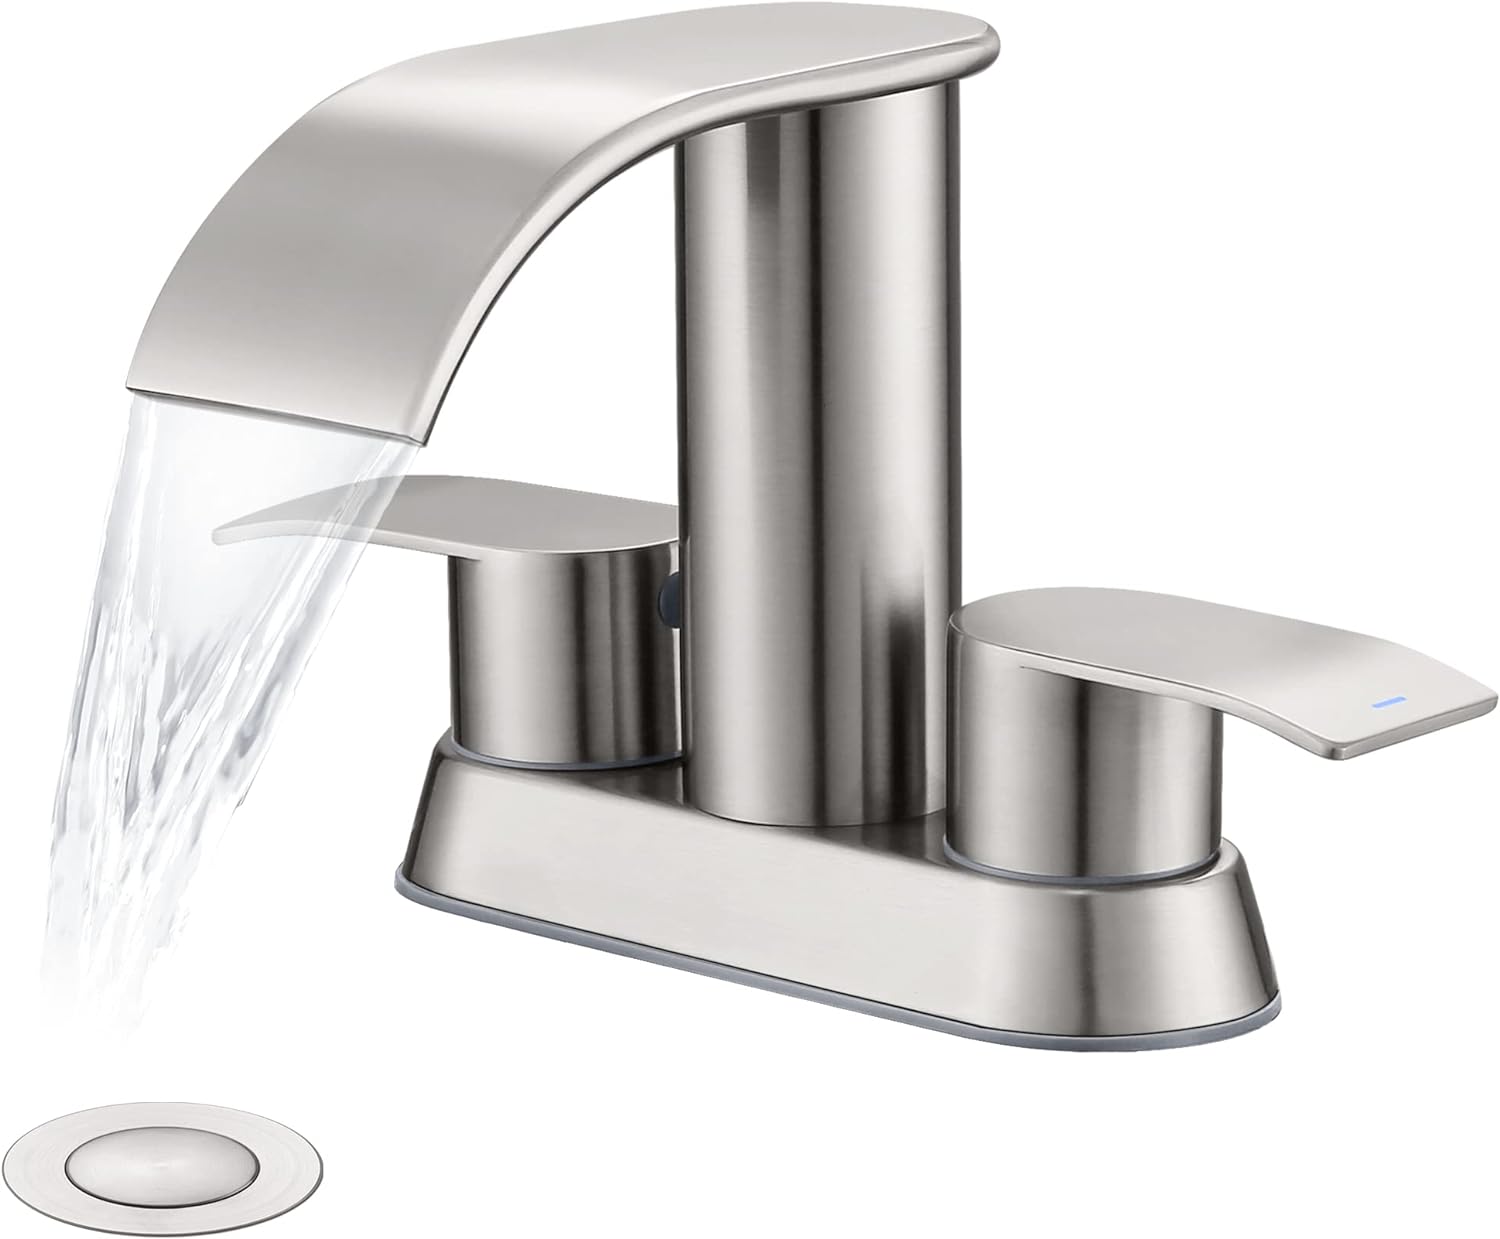 I recently had to replace a bathroom sink faucet due to issues with the handles becoming difficult to turn. After exploring options at Lowes and Home Depot, I found that many good-looking faucets were priced at over $100.The first thing that caught our attention was the modern and stylish design of this faucet. The reviews were promising, and the price was surprisingly reasonable compared to what we had seen in-store.We ordered the faucet and were pleasantly surprised to receive it the very next